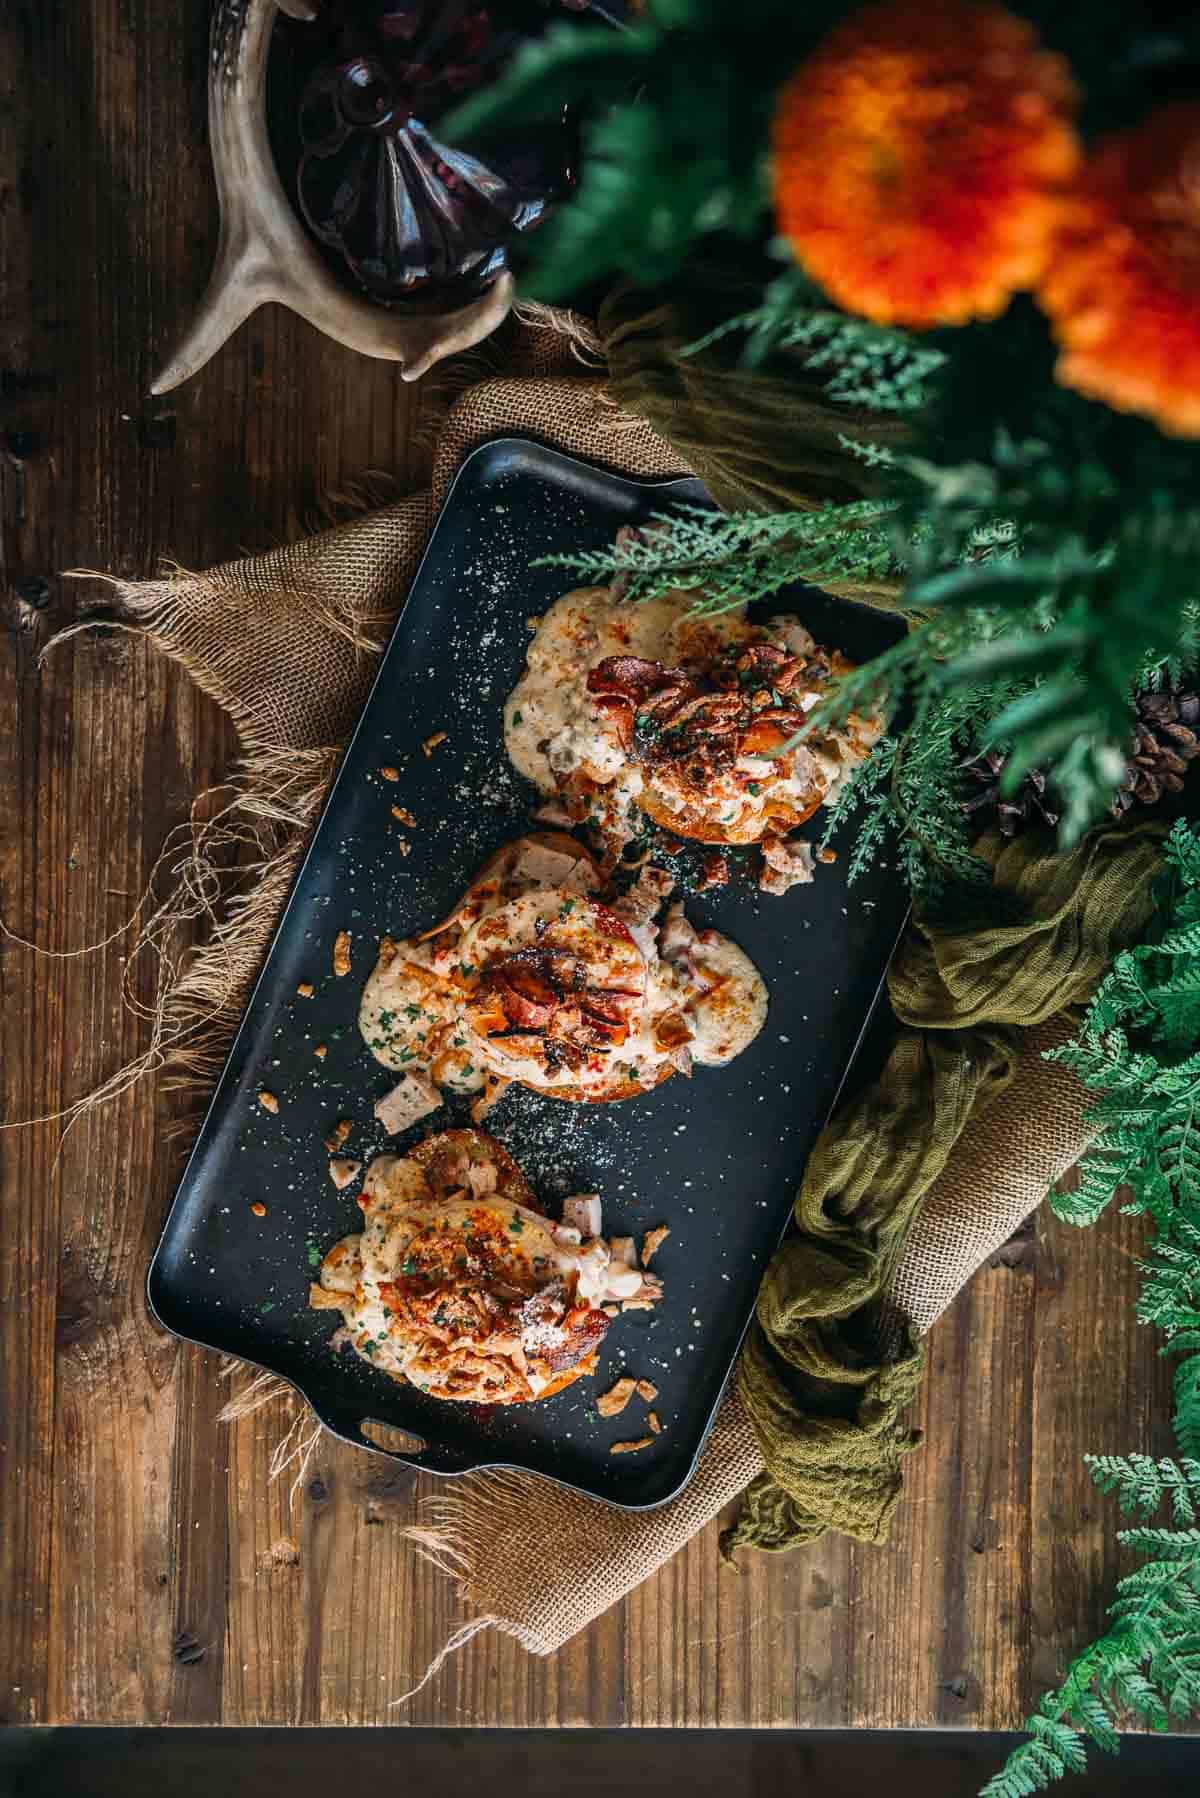 Hot brown sandwiches on a baking tray with herbs and spices on a wooden table.